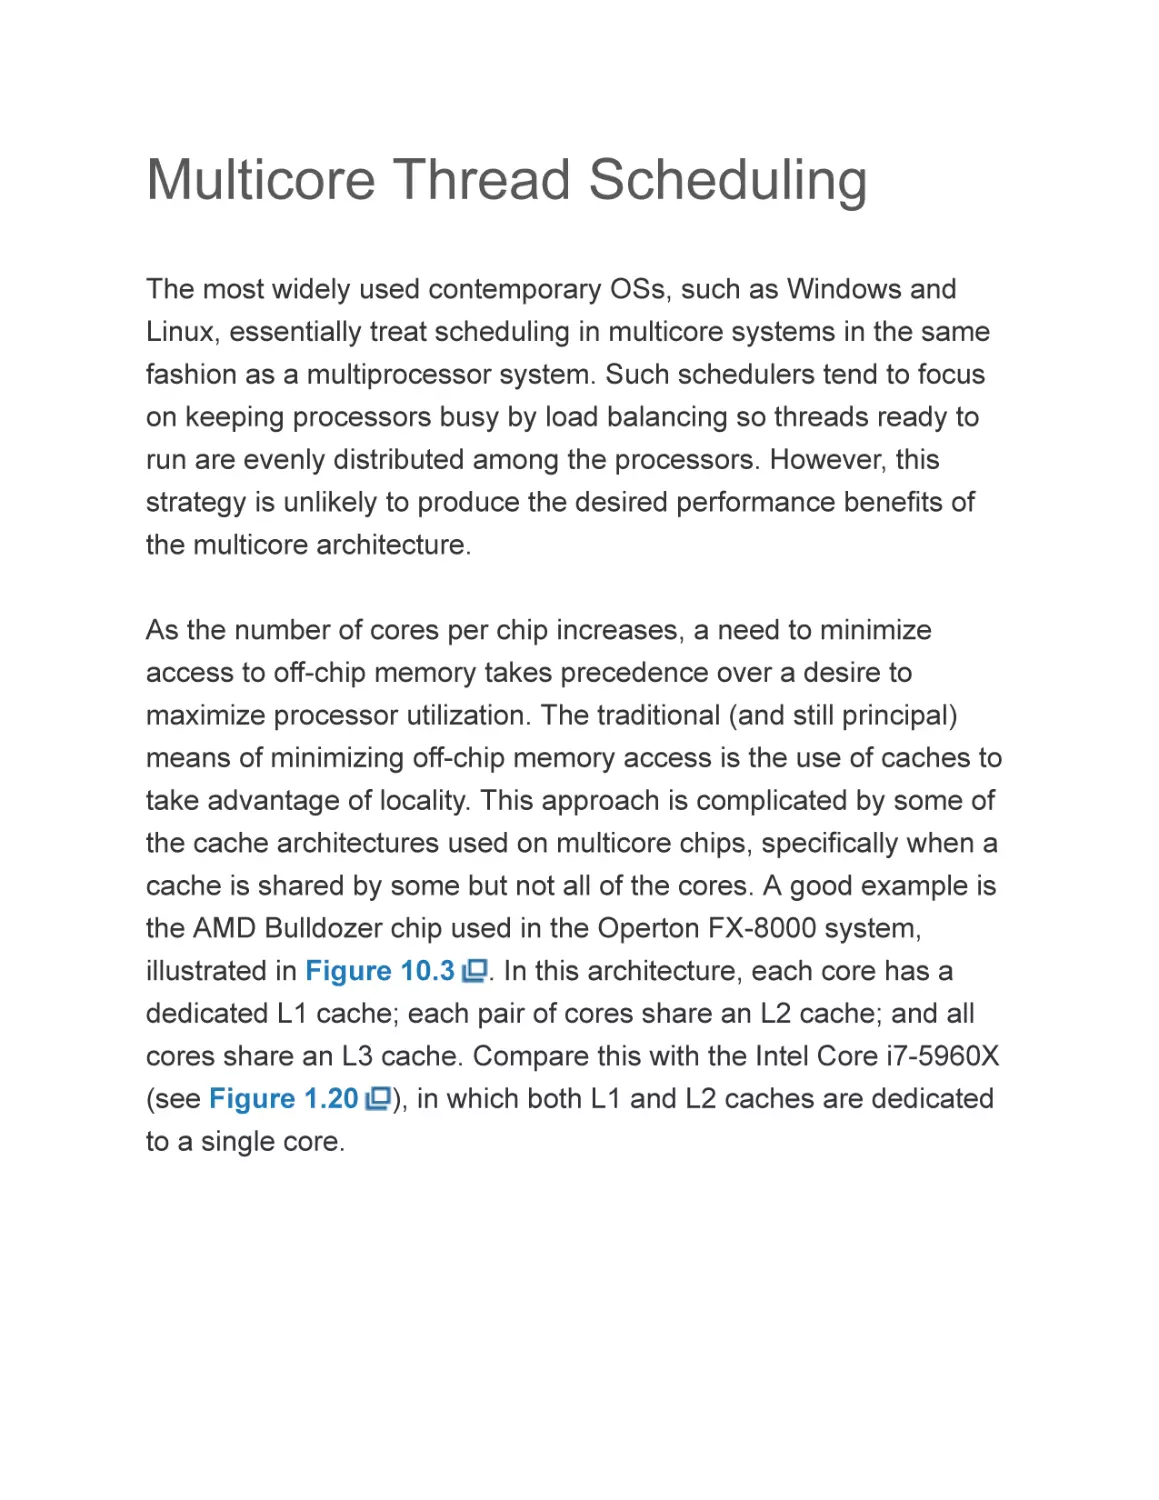 Multicore Thread Scheduling